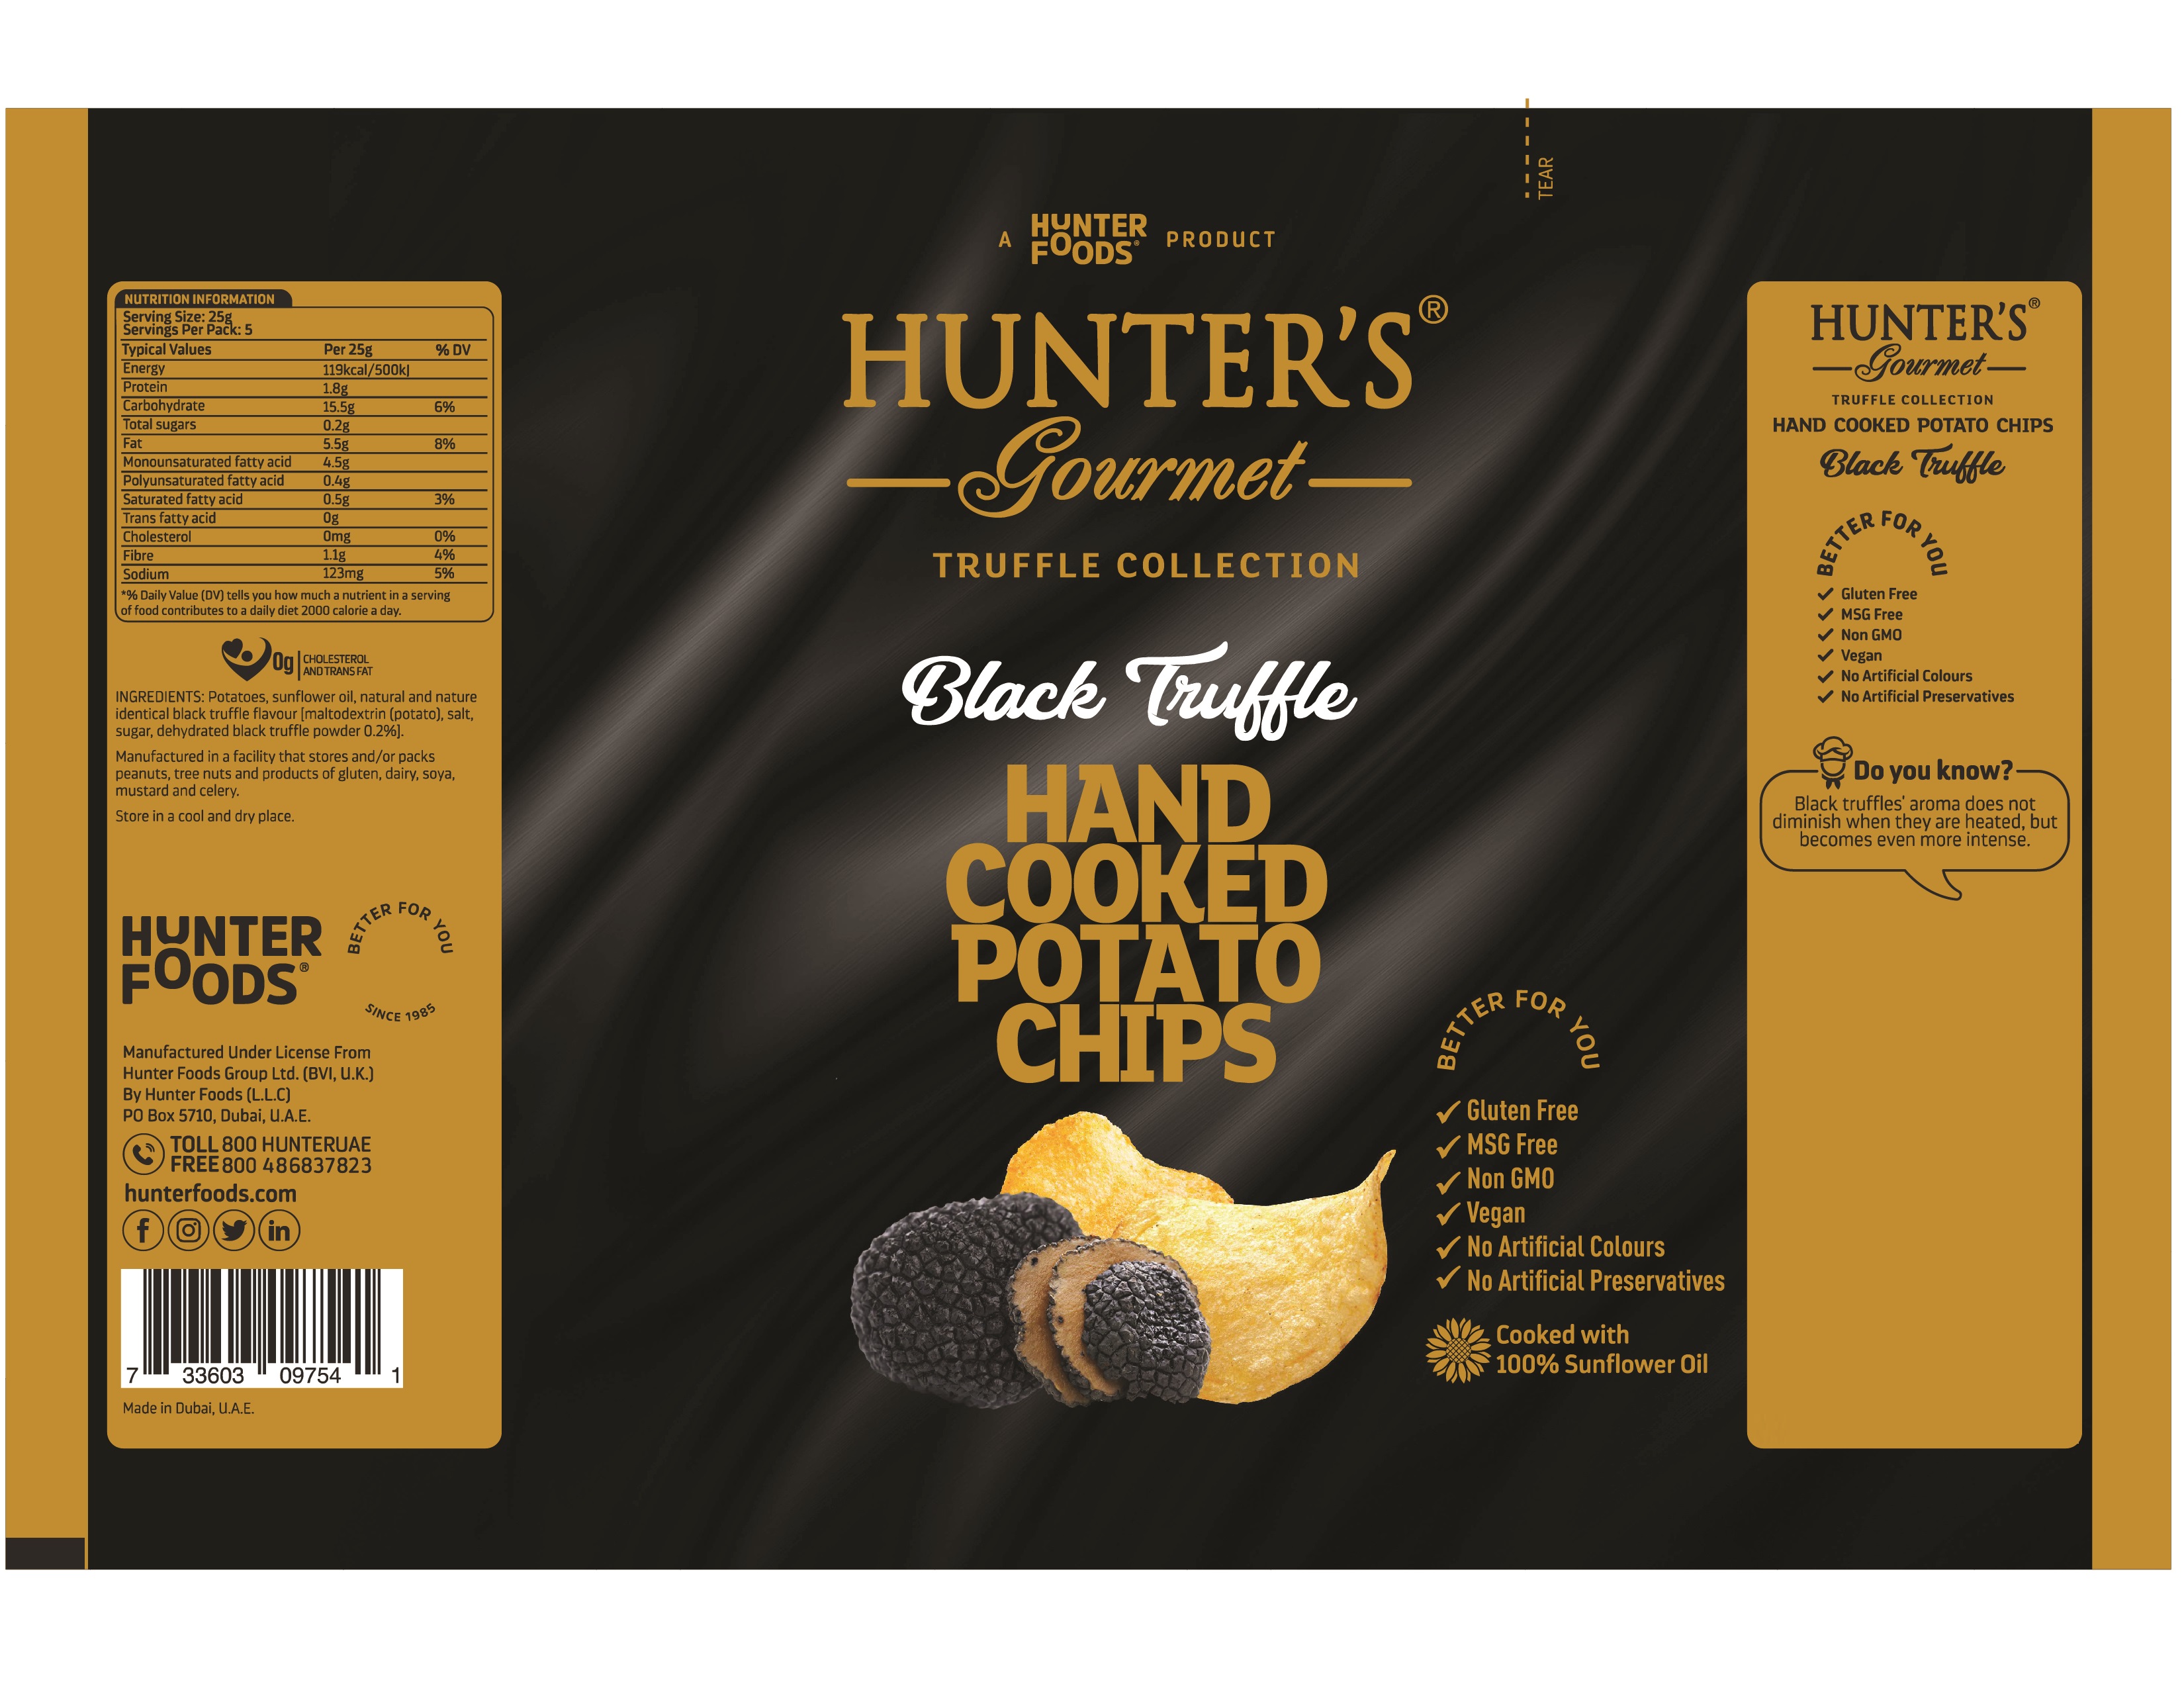 Hunter's Gourmet Hand Cooked Potato Chips Black Truffle 12 units per case 125 g Product Label